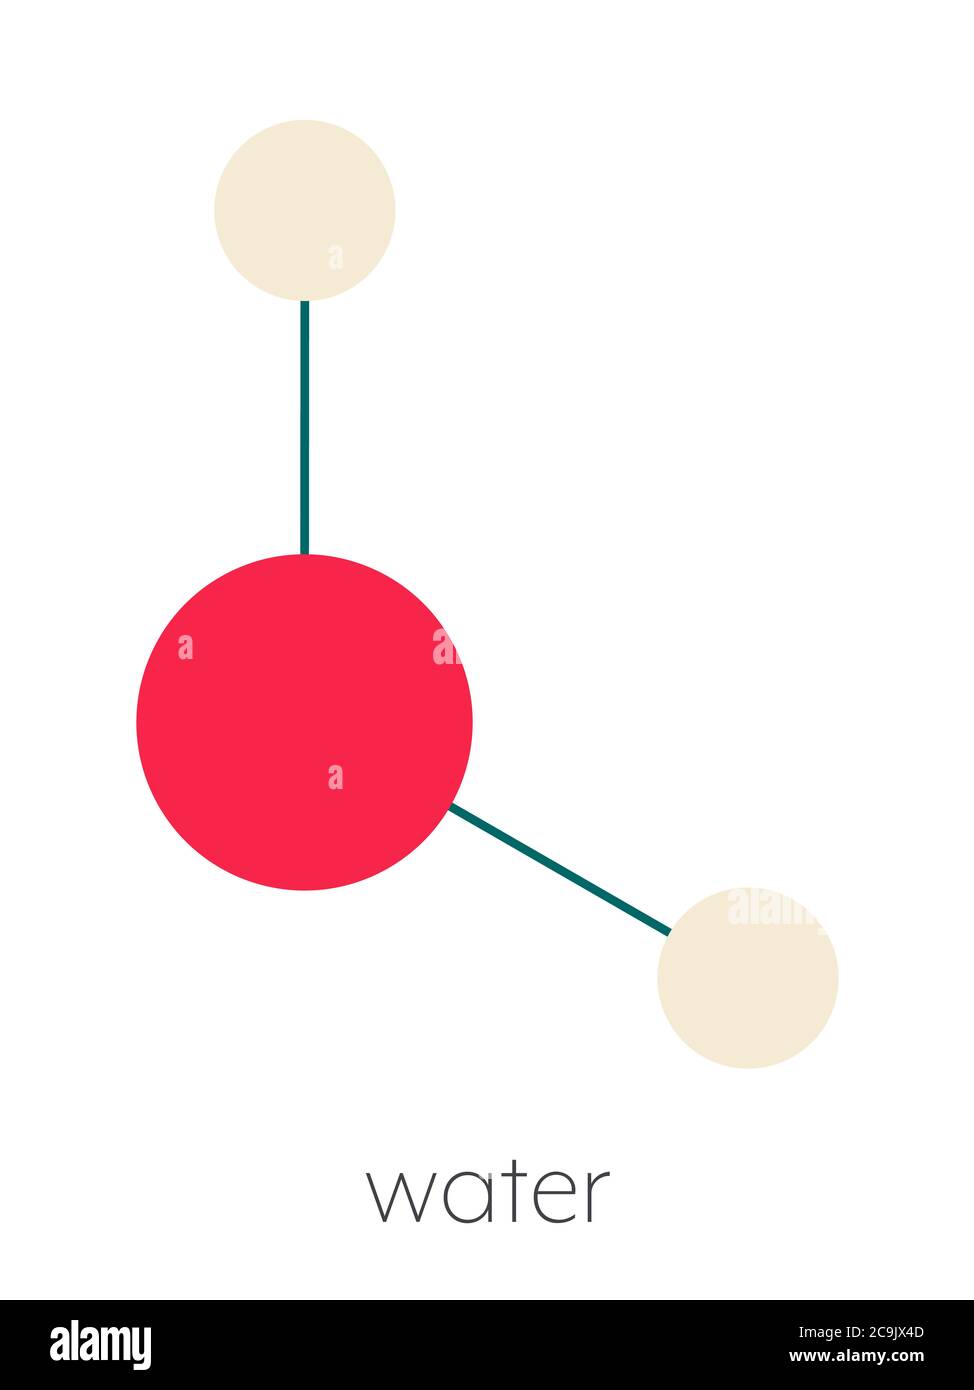 Water (H2O) molecule. Stylized skeletal formula (chemical structure). Atoms are shown as color-coded circles connected by thin bonds, on a white backg Stock Photo